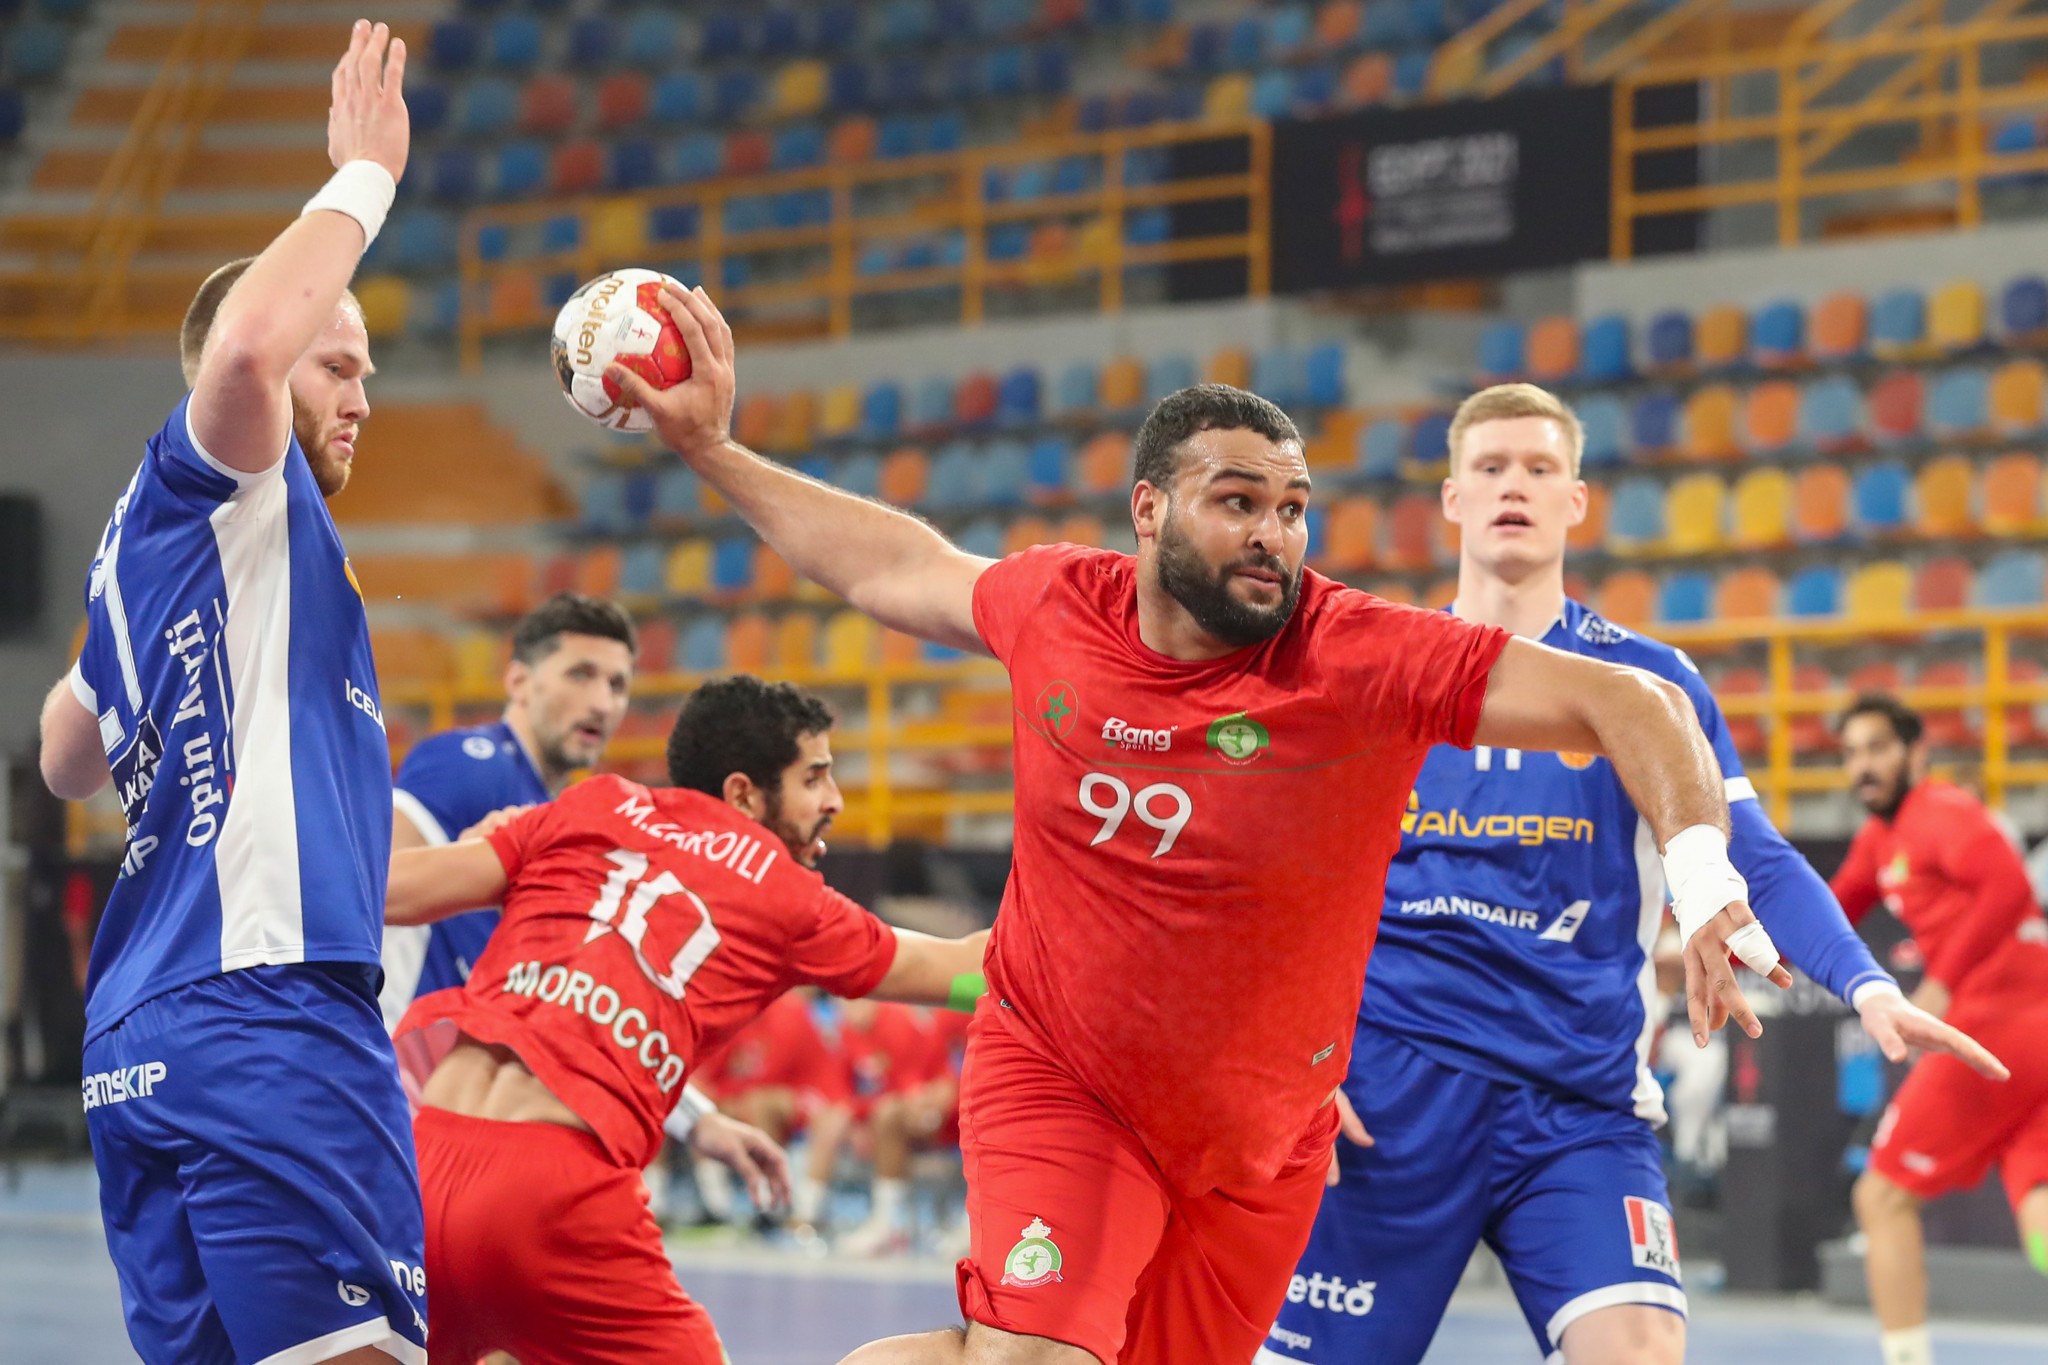 Morocco is due to play host to the rescheduled African Men’s Handball Championship ©Getty Images